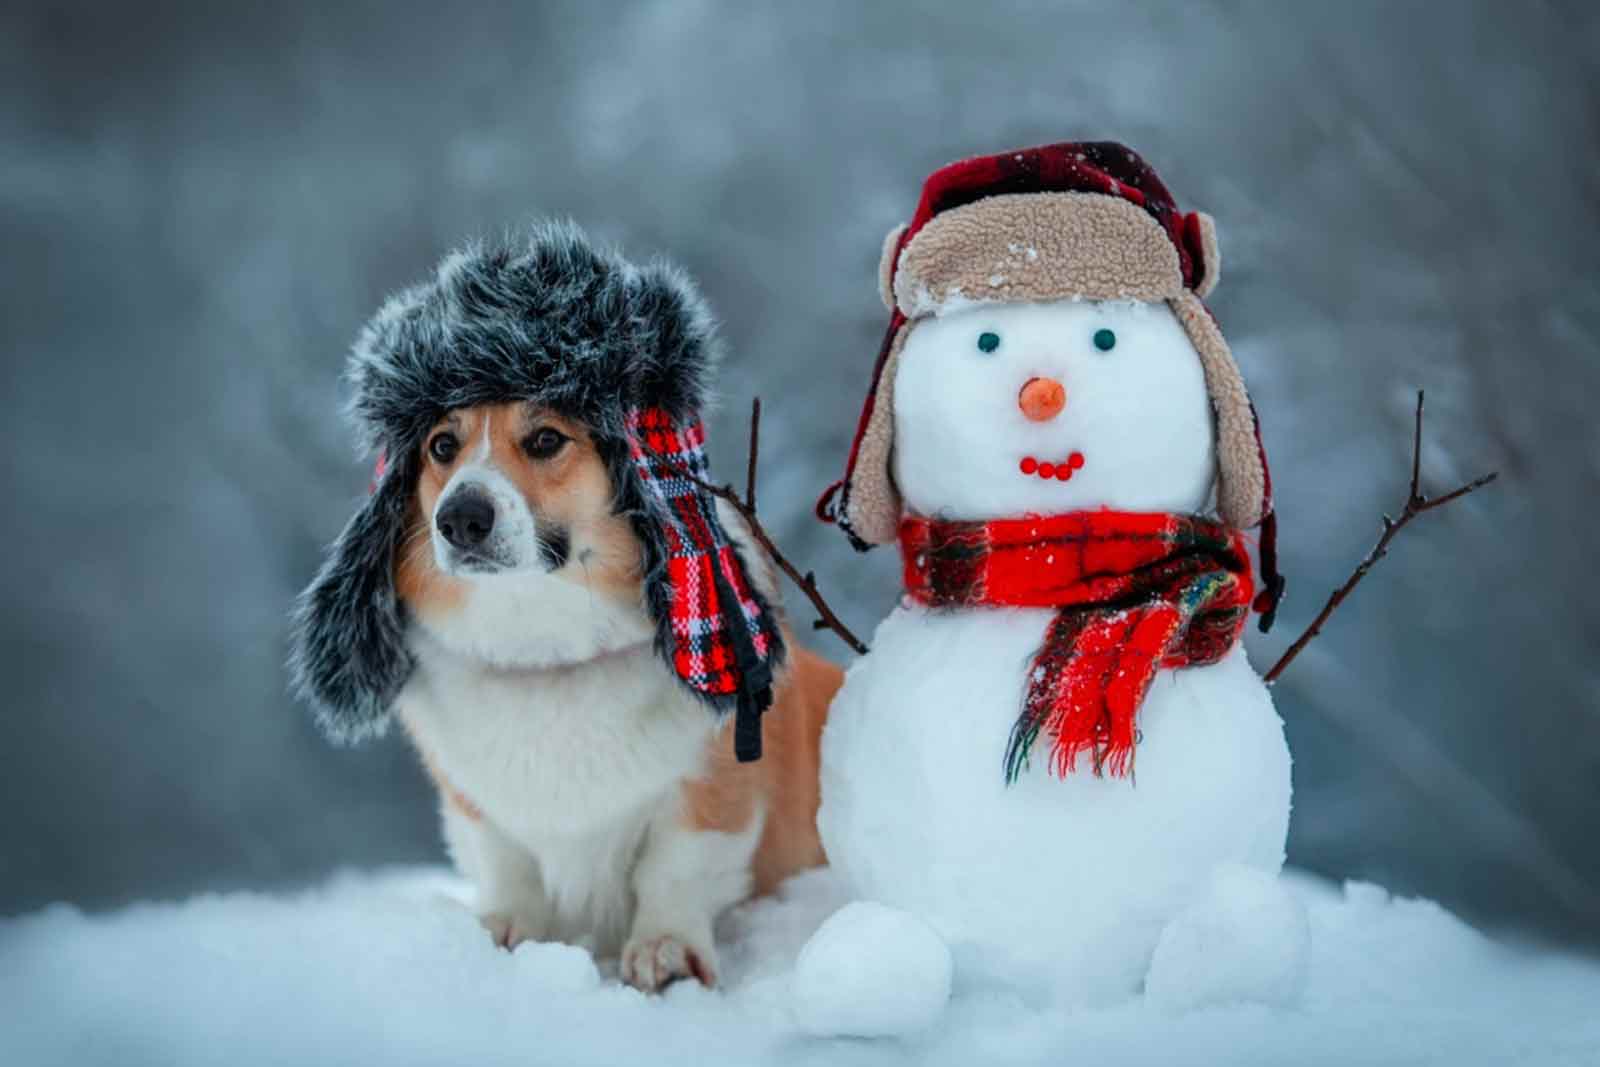 Fun Winter Activities for the Whole Family